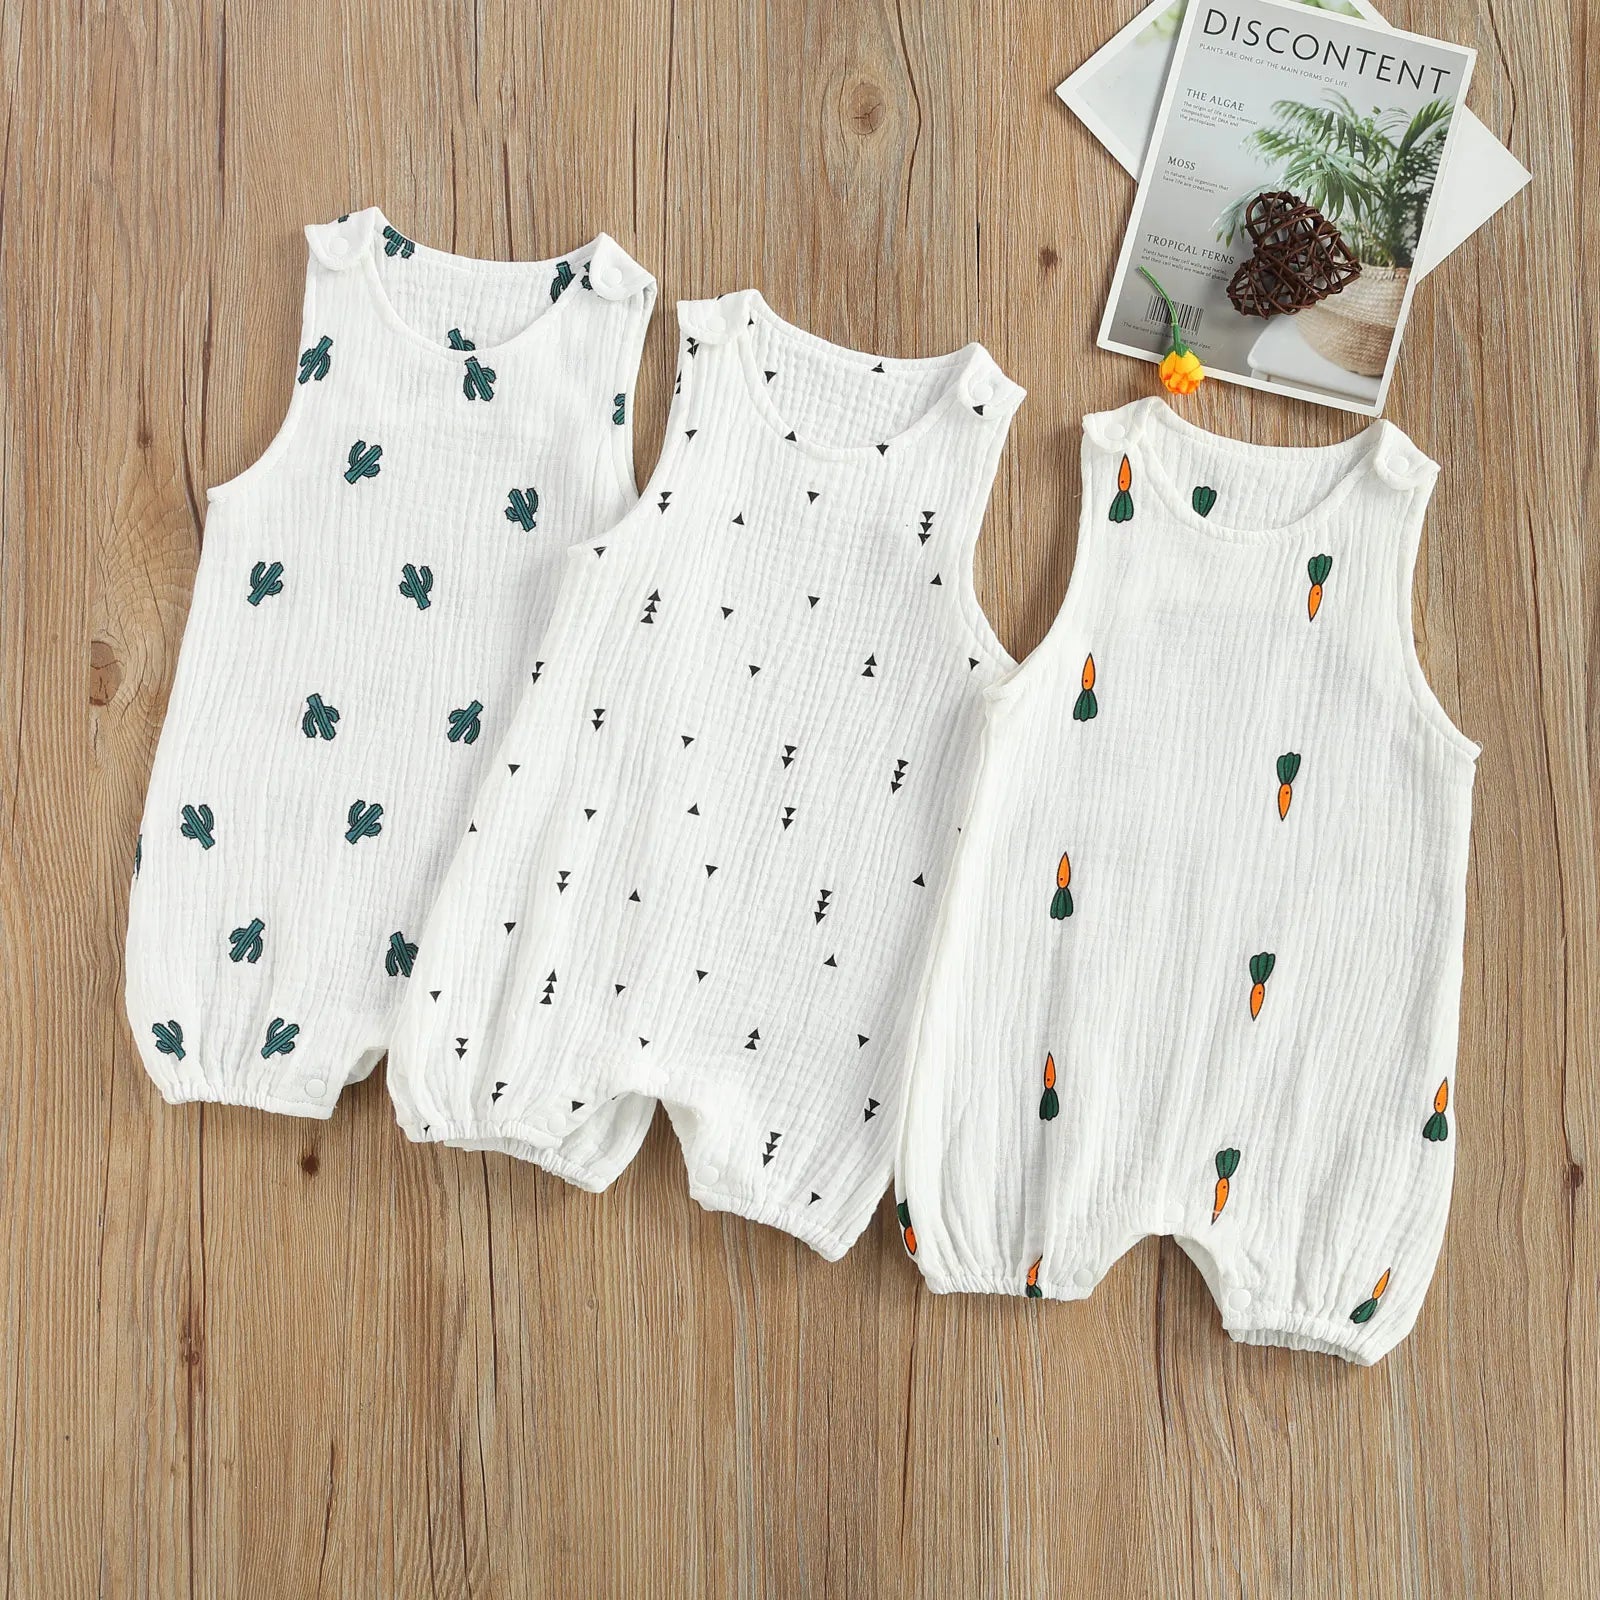 Newborn Infant Baby Boys Girls Rompers Jumpsuits Playsuits Cotton Linen Muslin Sleeveless Toddler Baby Summer Clothing